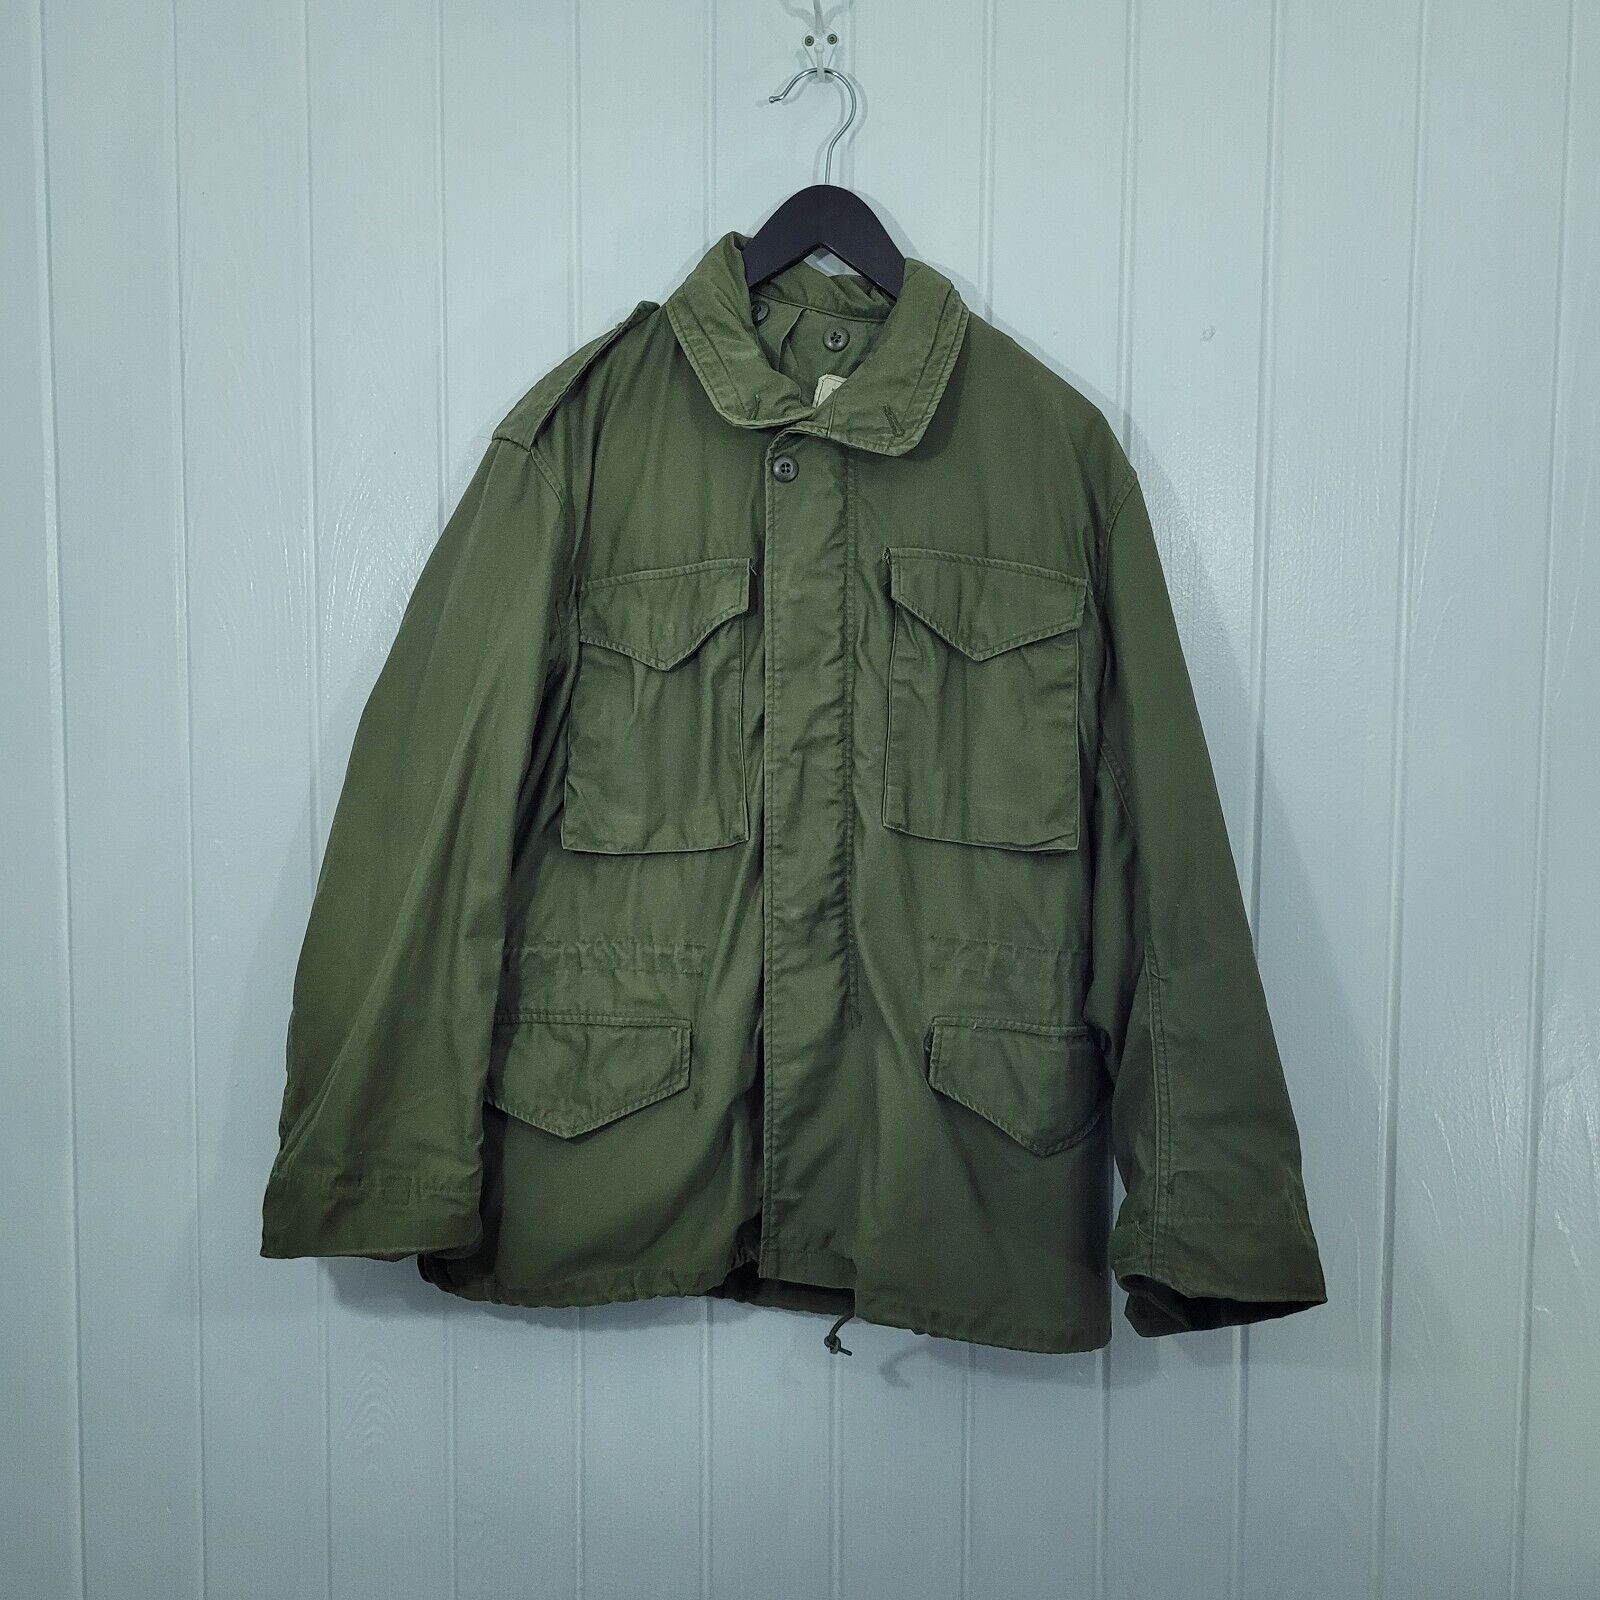 Vintage 1973 M-65 Medium Long Green Military Army Cold Weather Field Jacket/Coat